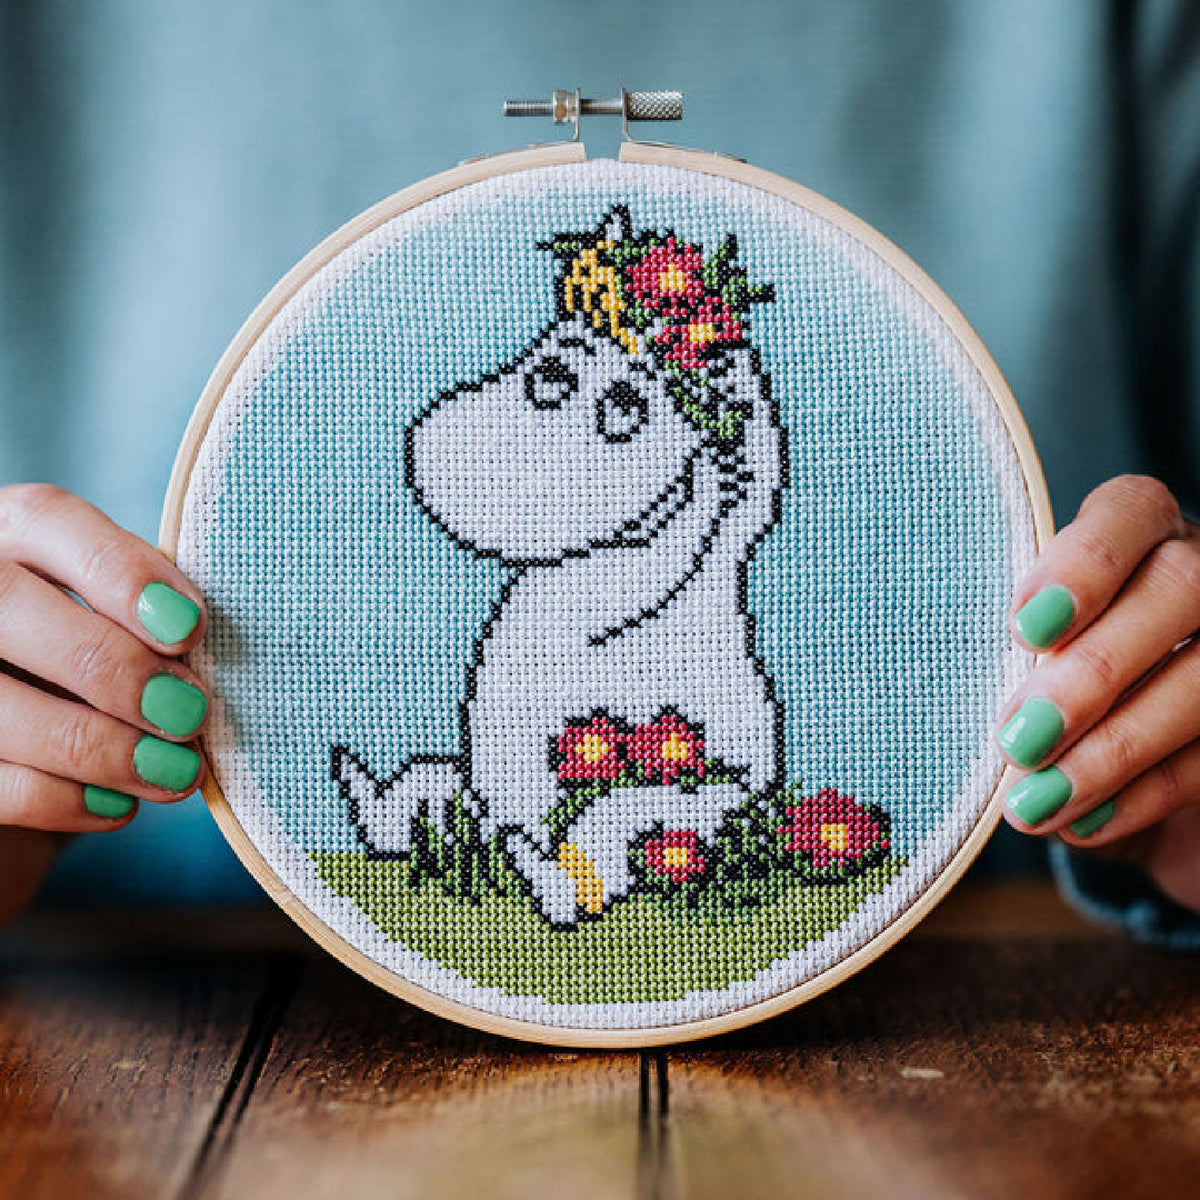 Moomin Cross Stitch Kit Snorkmaiden With A flower Crown